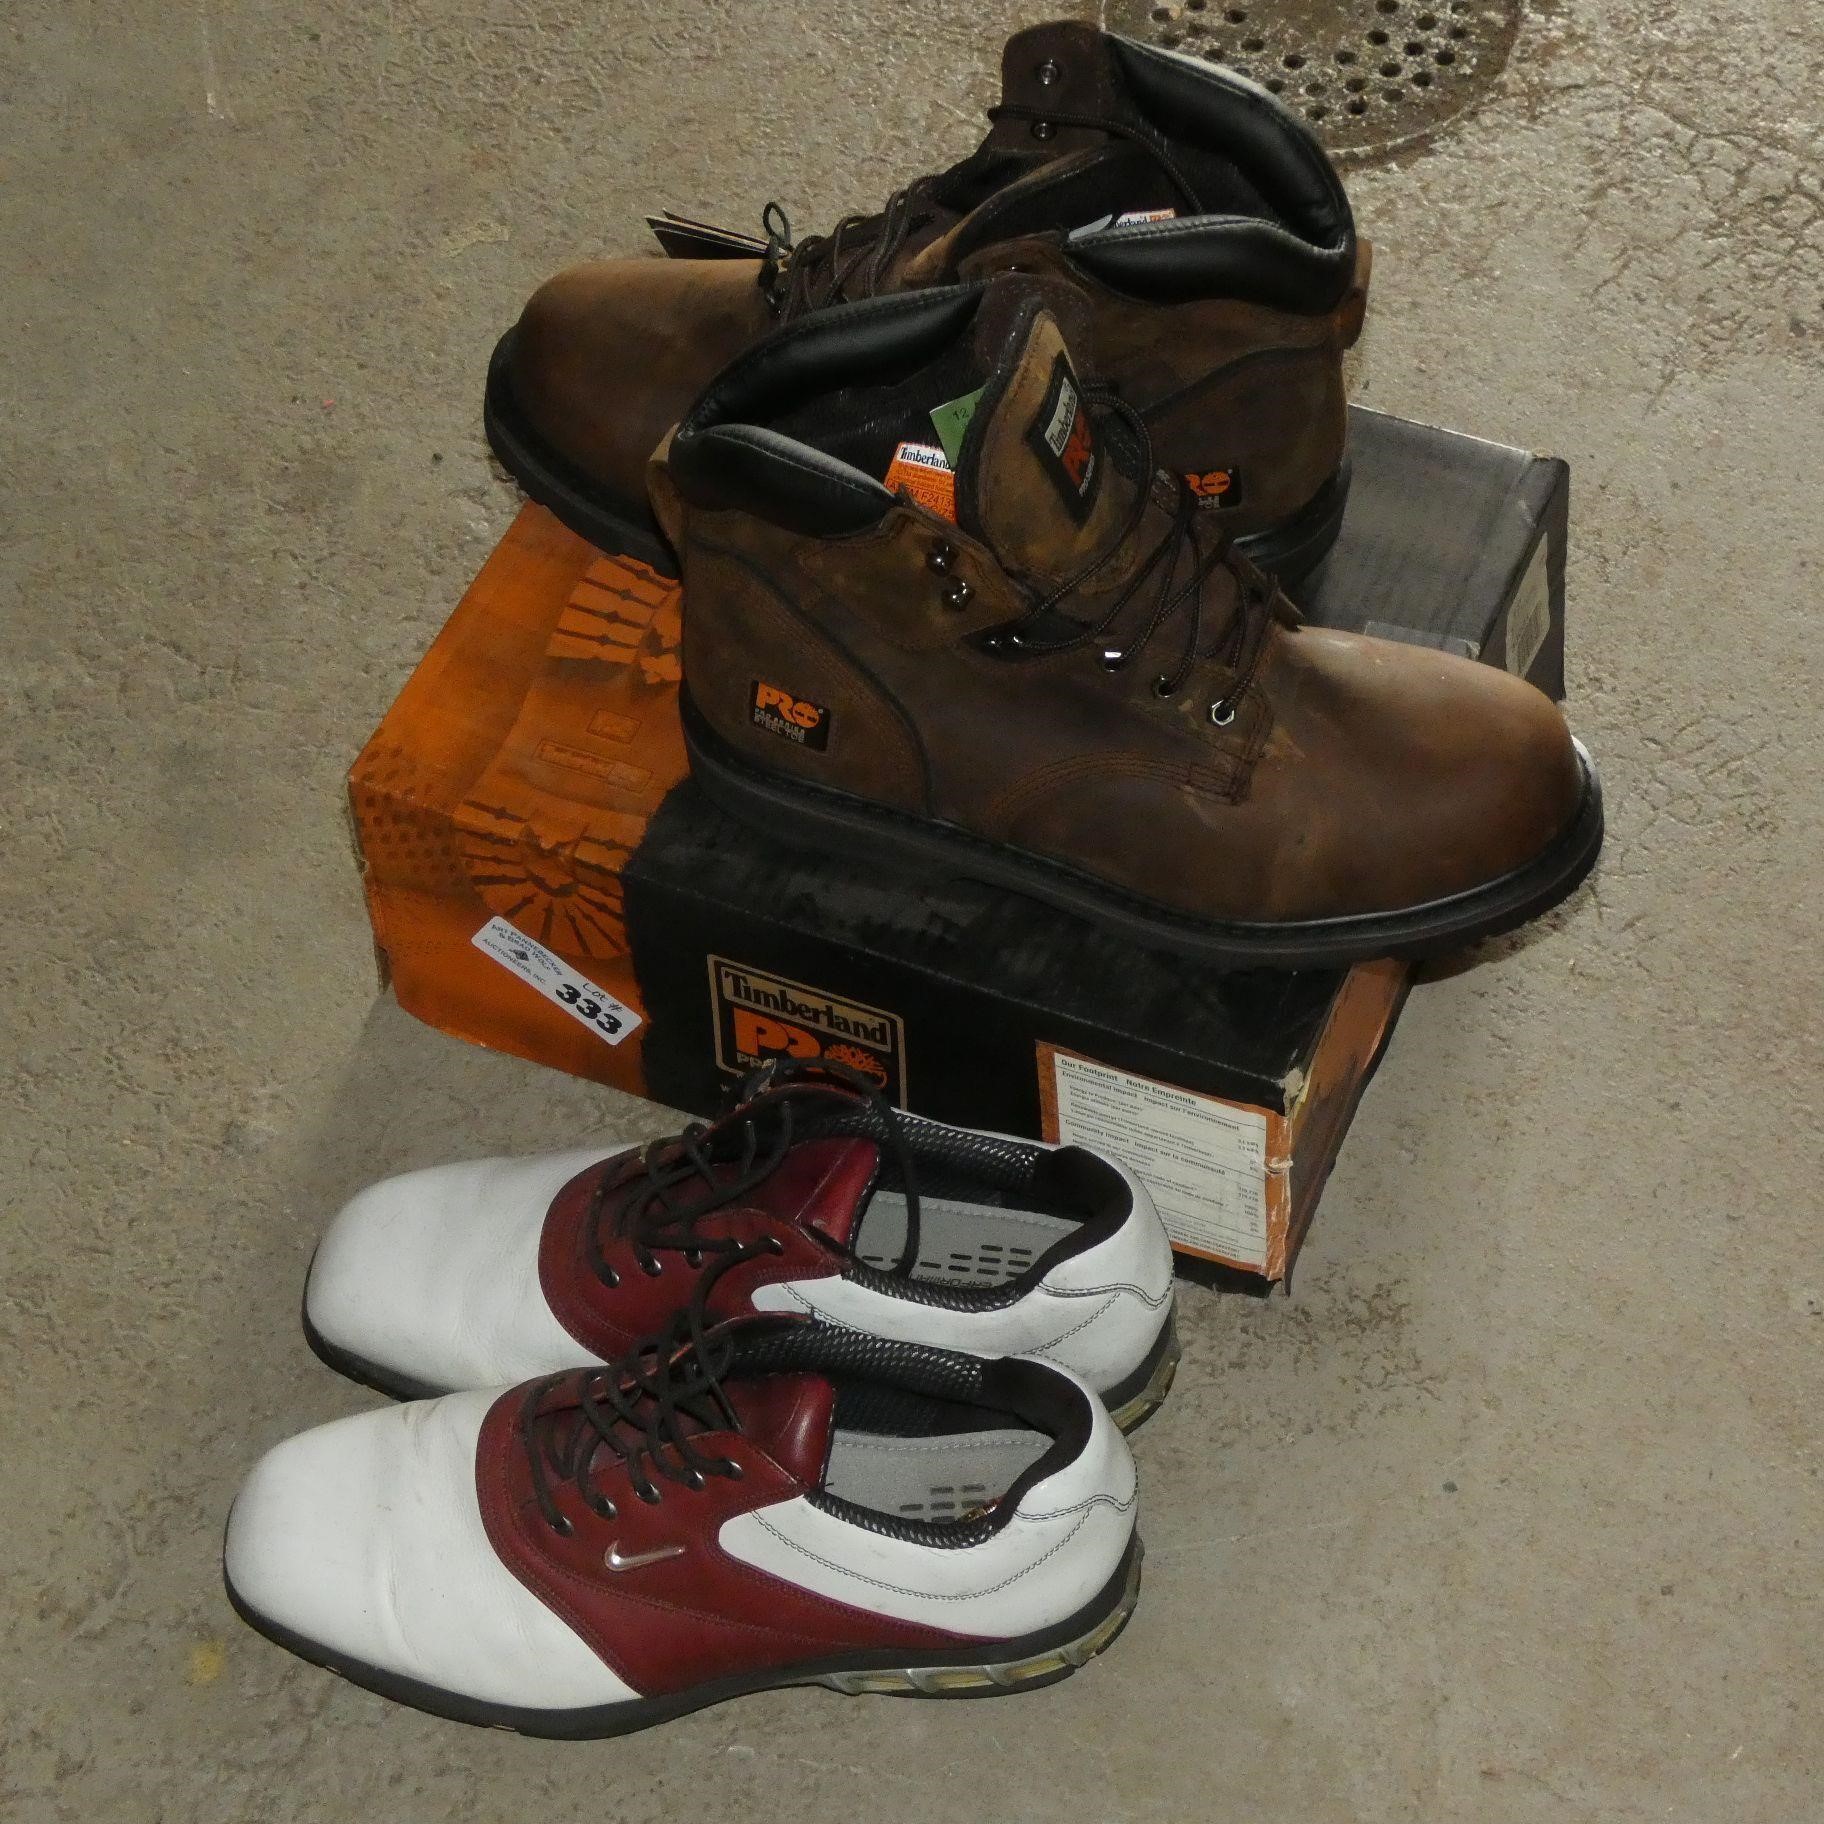 New Timberland Pro Series Boots & Nike Golf Shoes